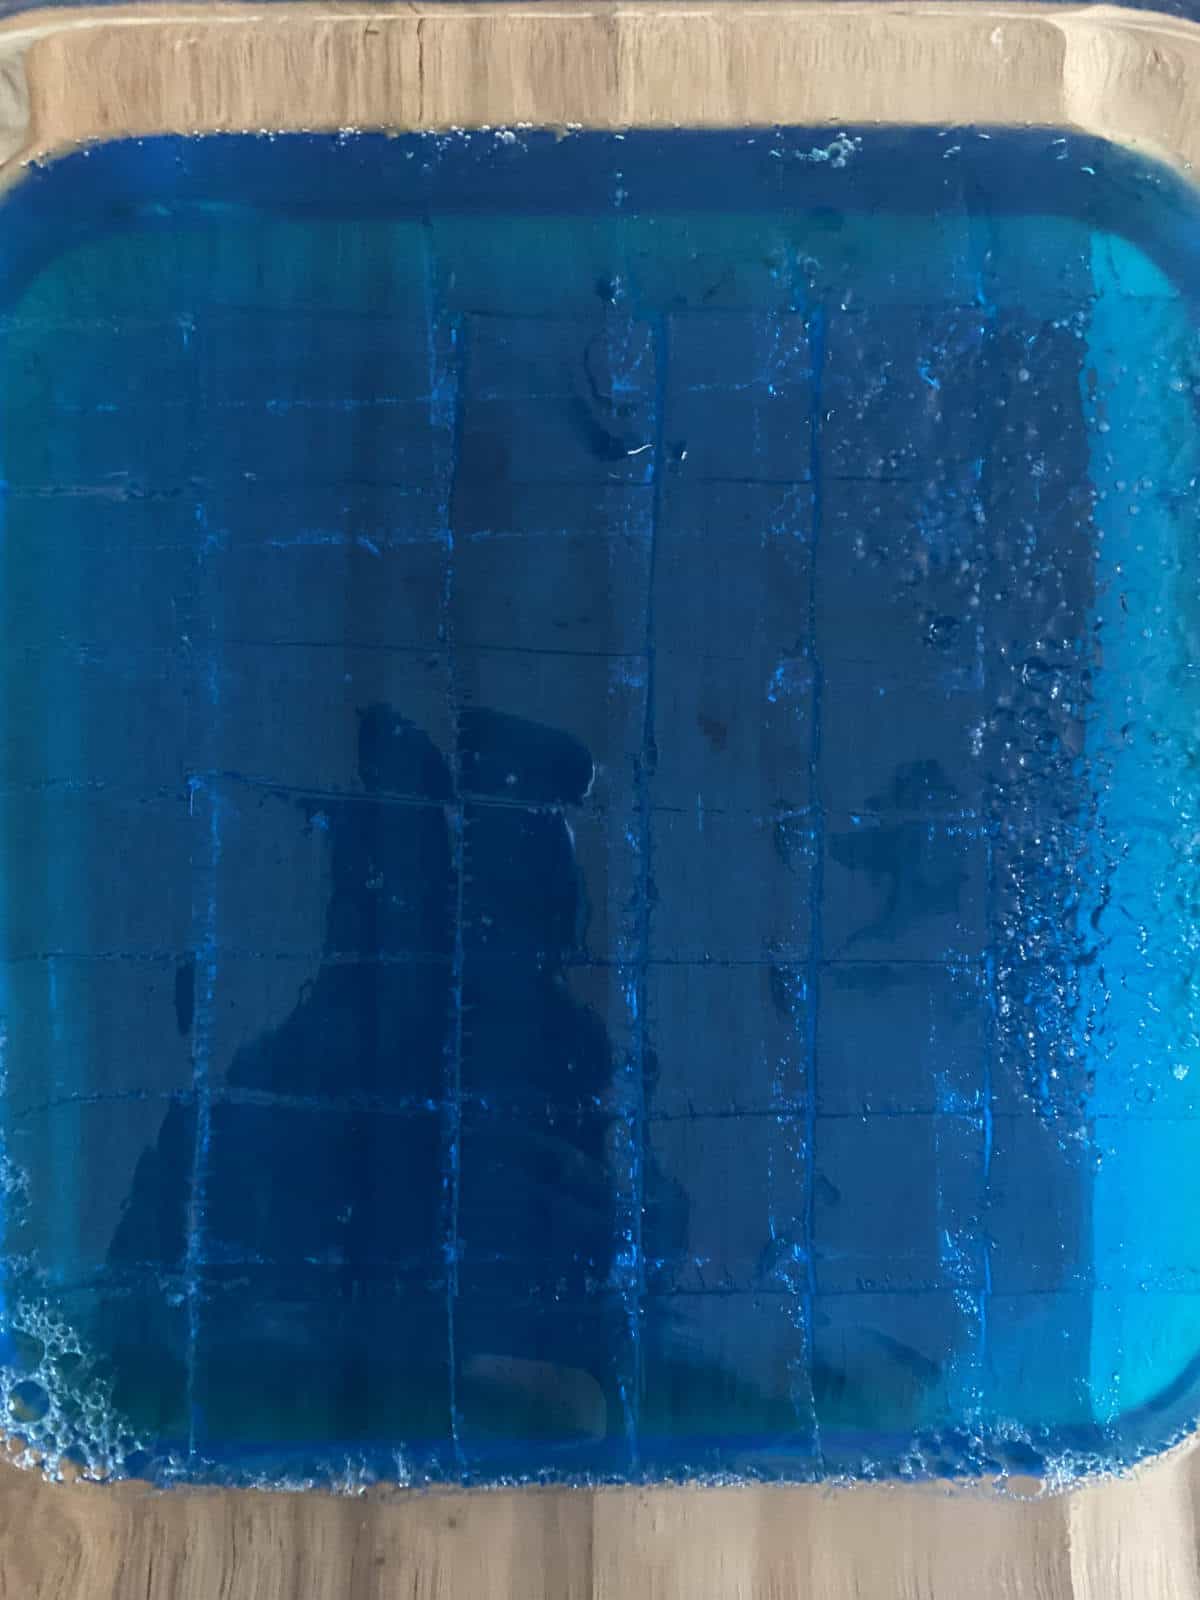 Blue Jell-O with horizontals and vertical line cuts, making squares